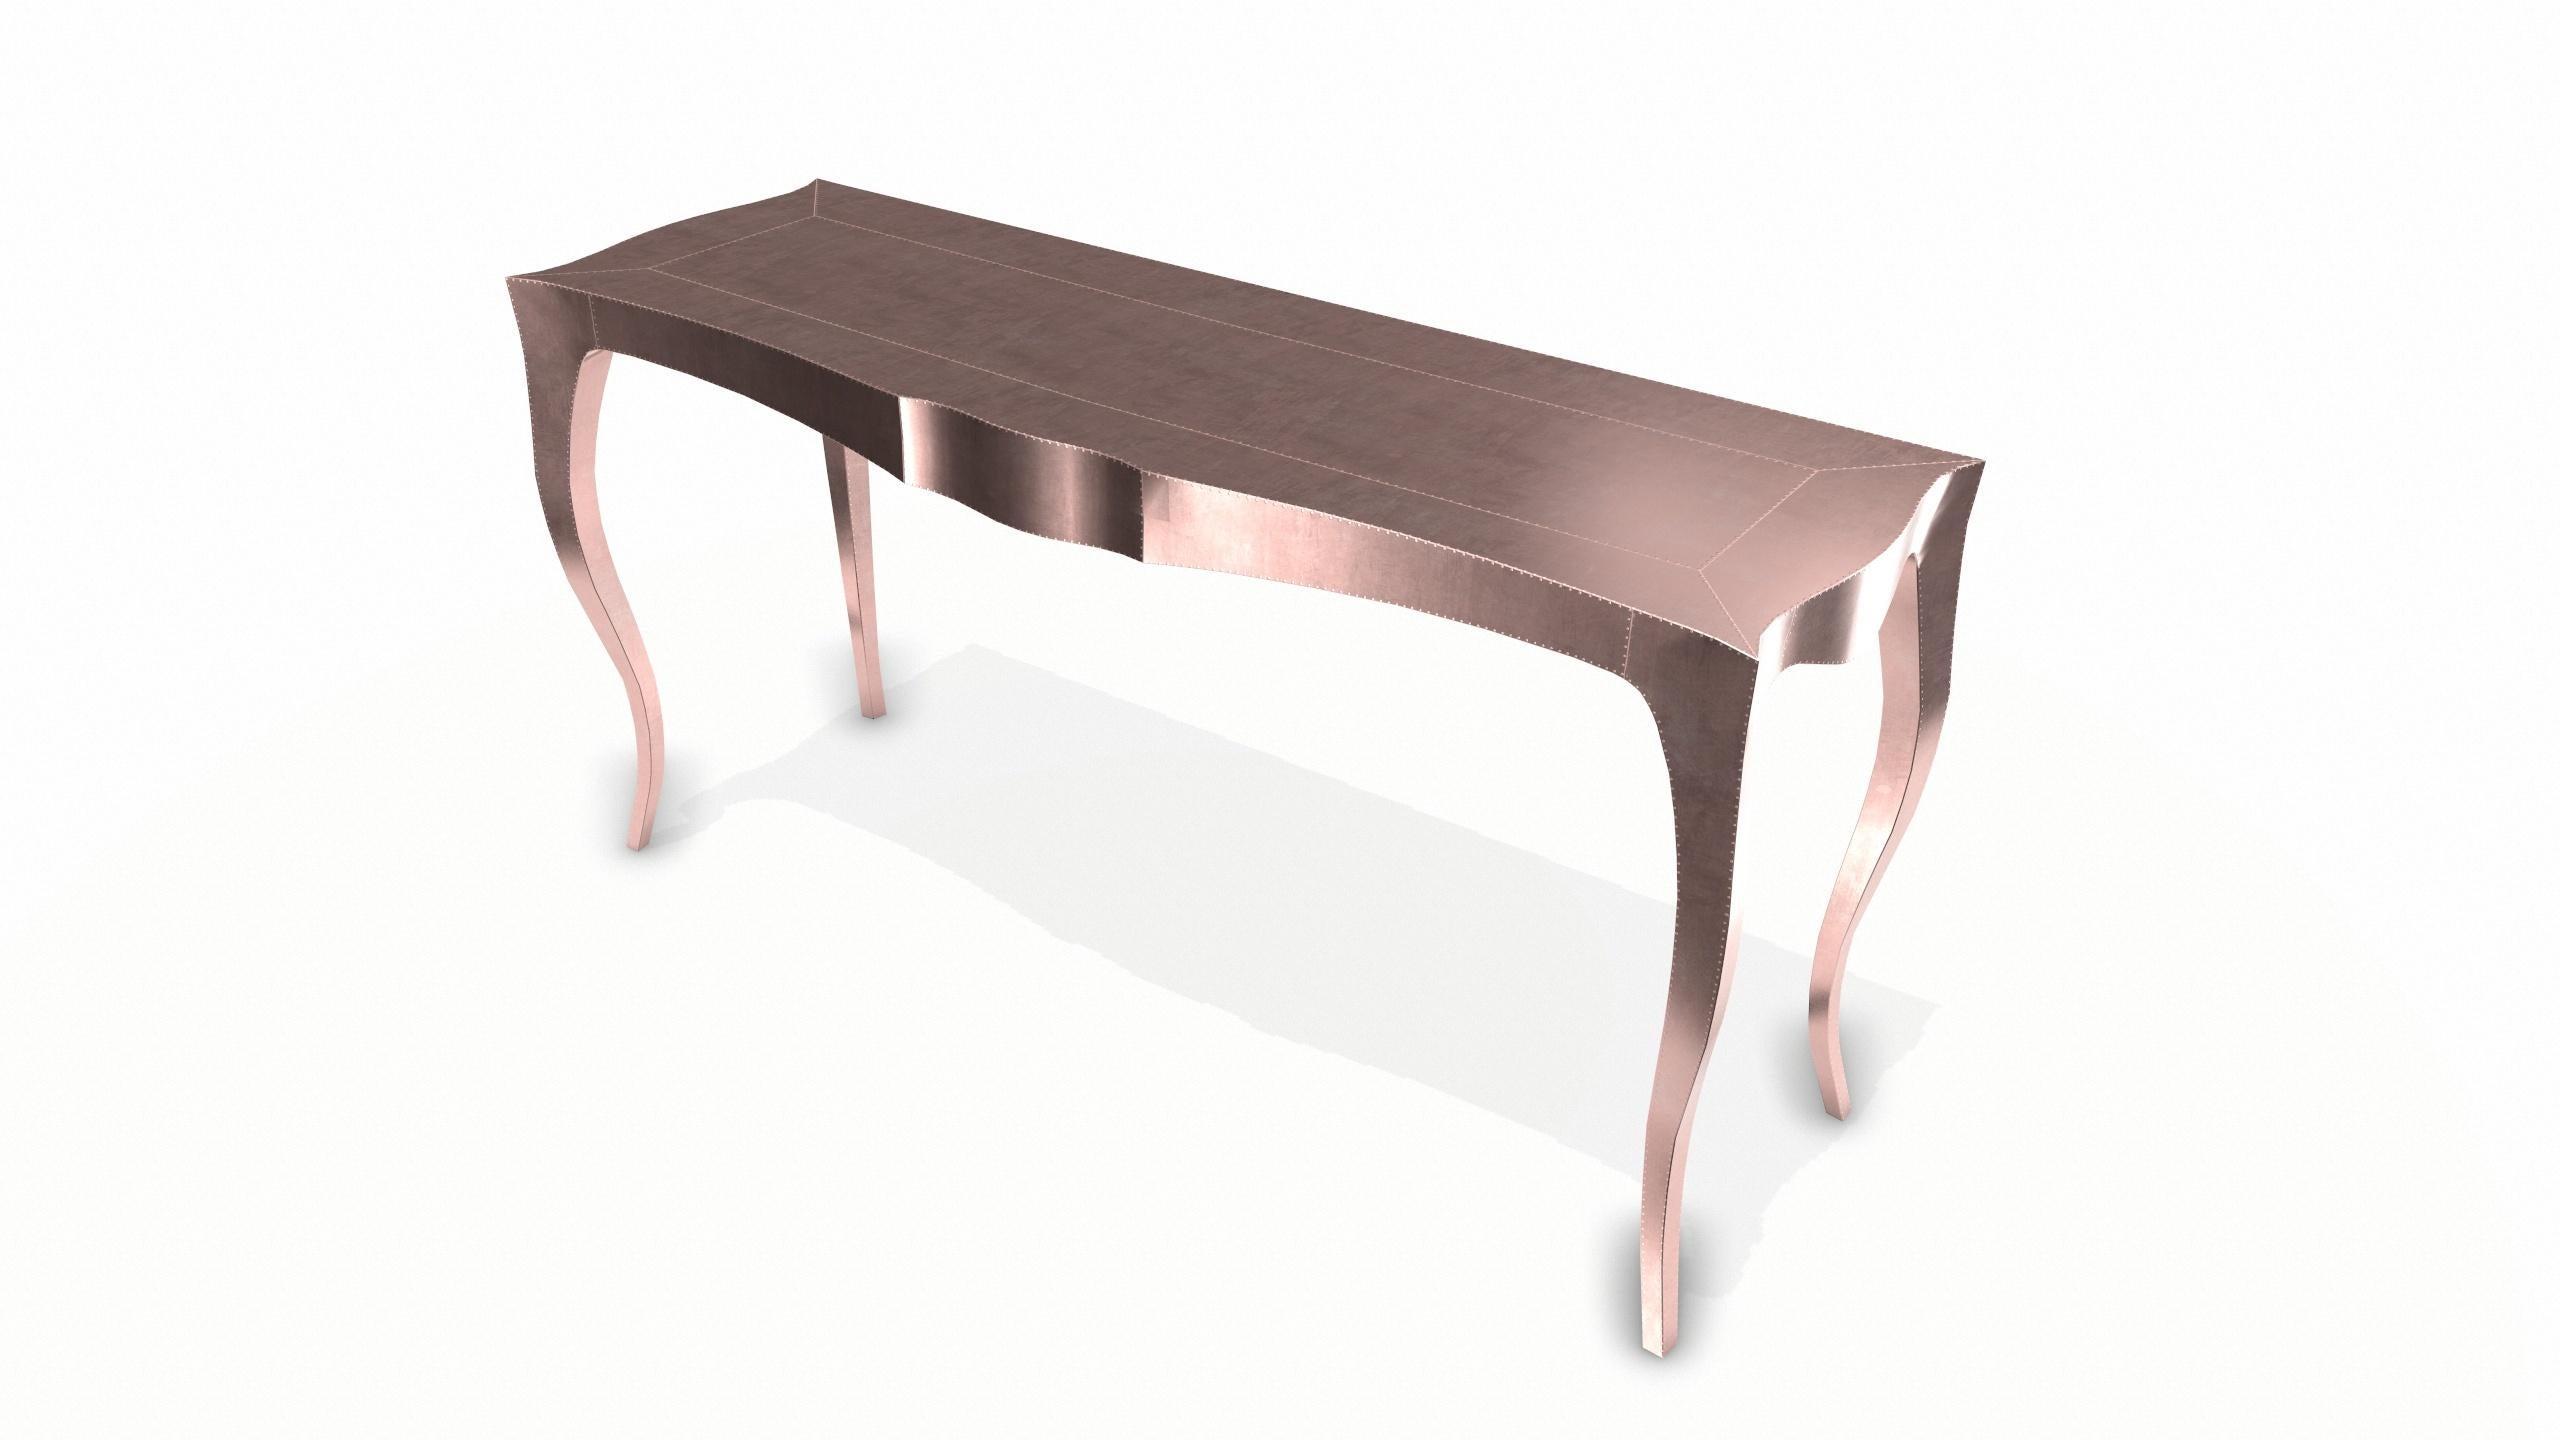 Other Louise Console Art Deco Center Tables Smooth Copper by Paul Mathieu For Sale